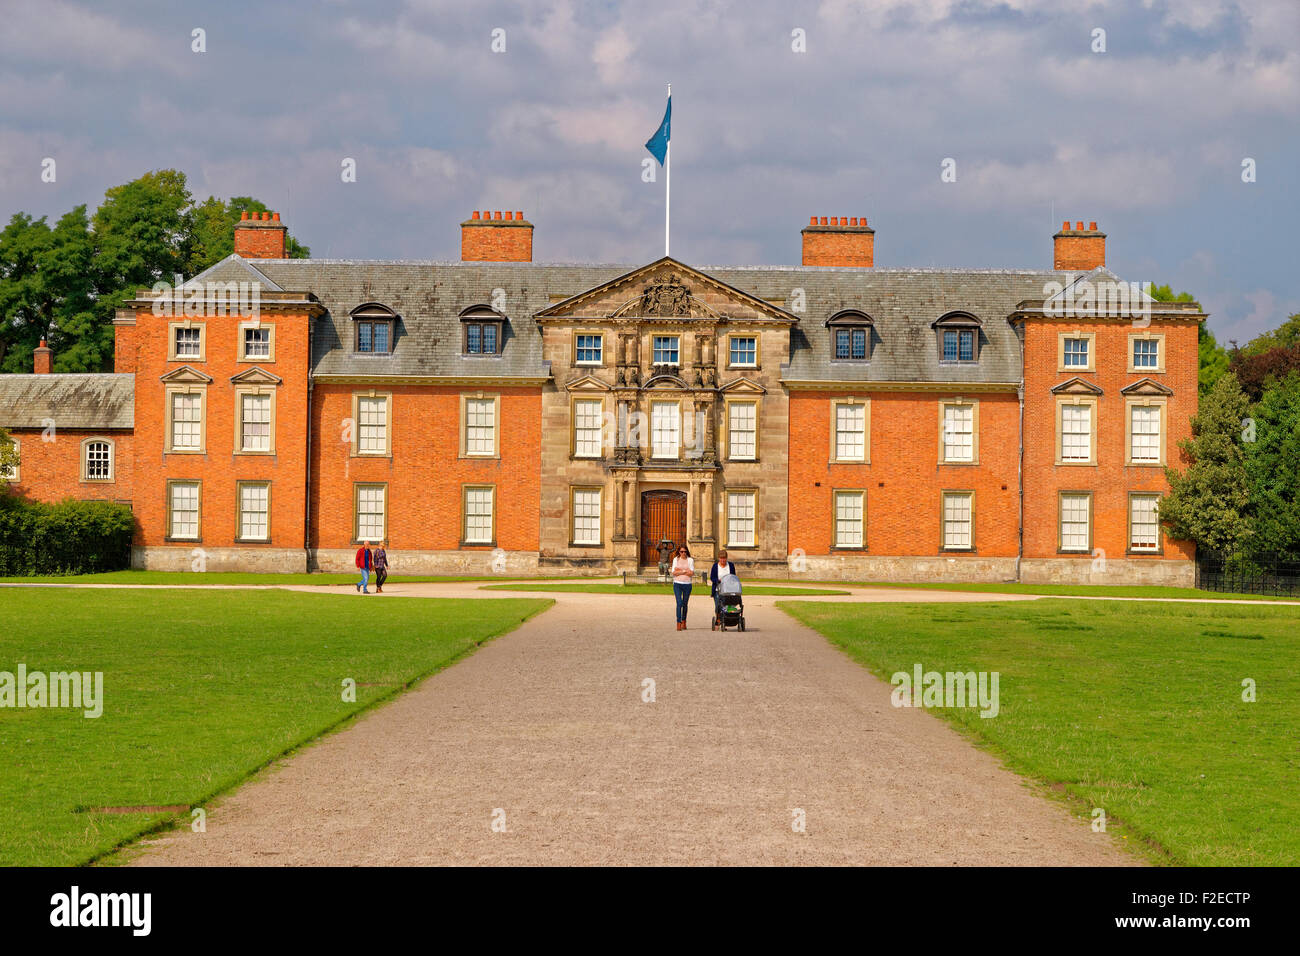 Dunham Massey Hall, Dunham Park, Altrincham, Cheshire. Greater Manchester. Former seat of The Lord Stamford. Stock Photo